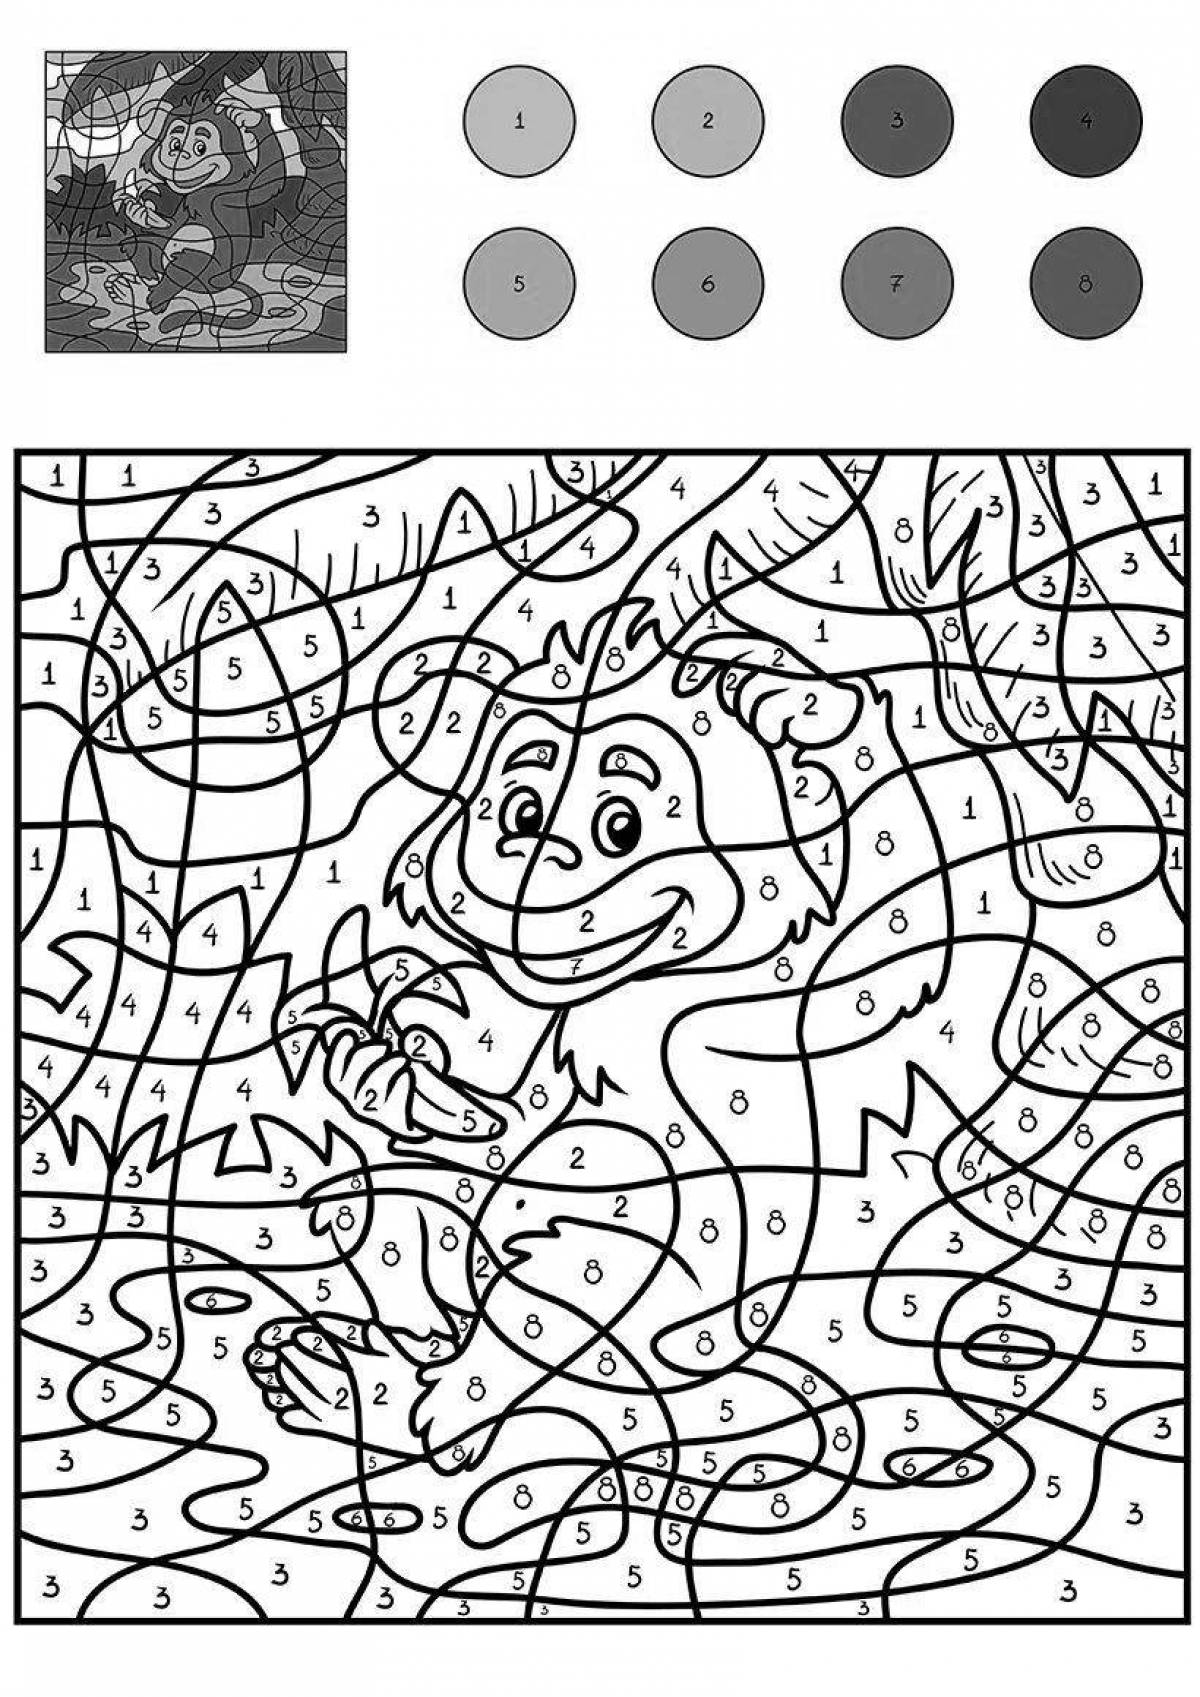 Dazzling coloring by numbers with the mouse